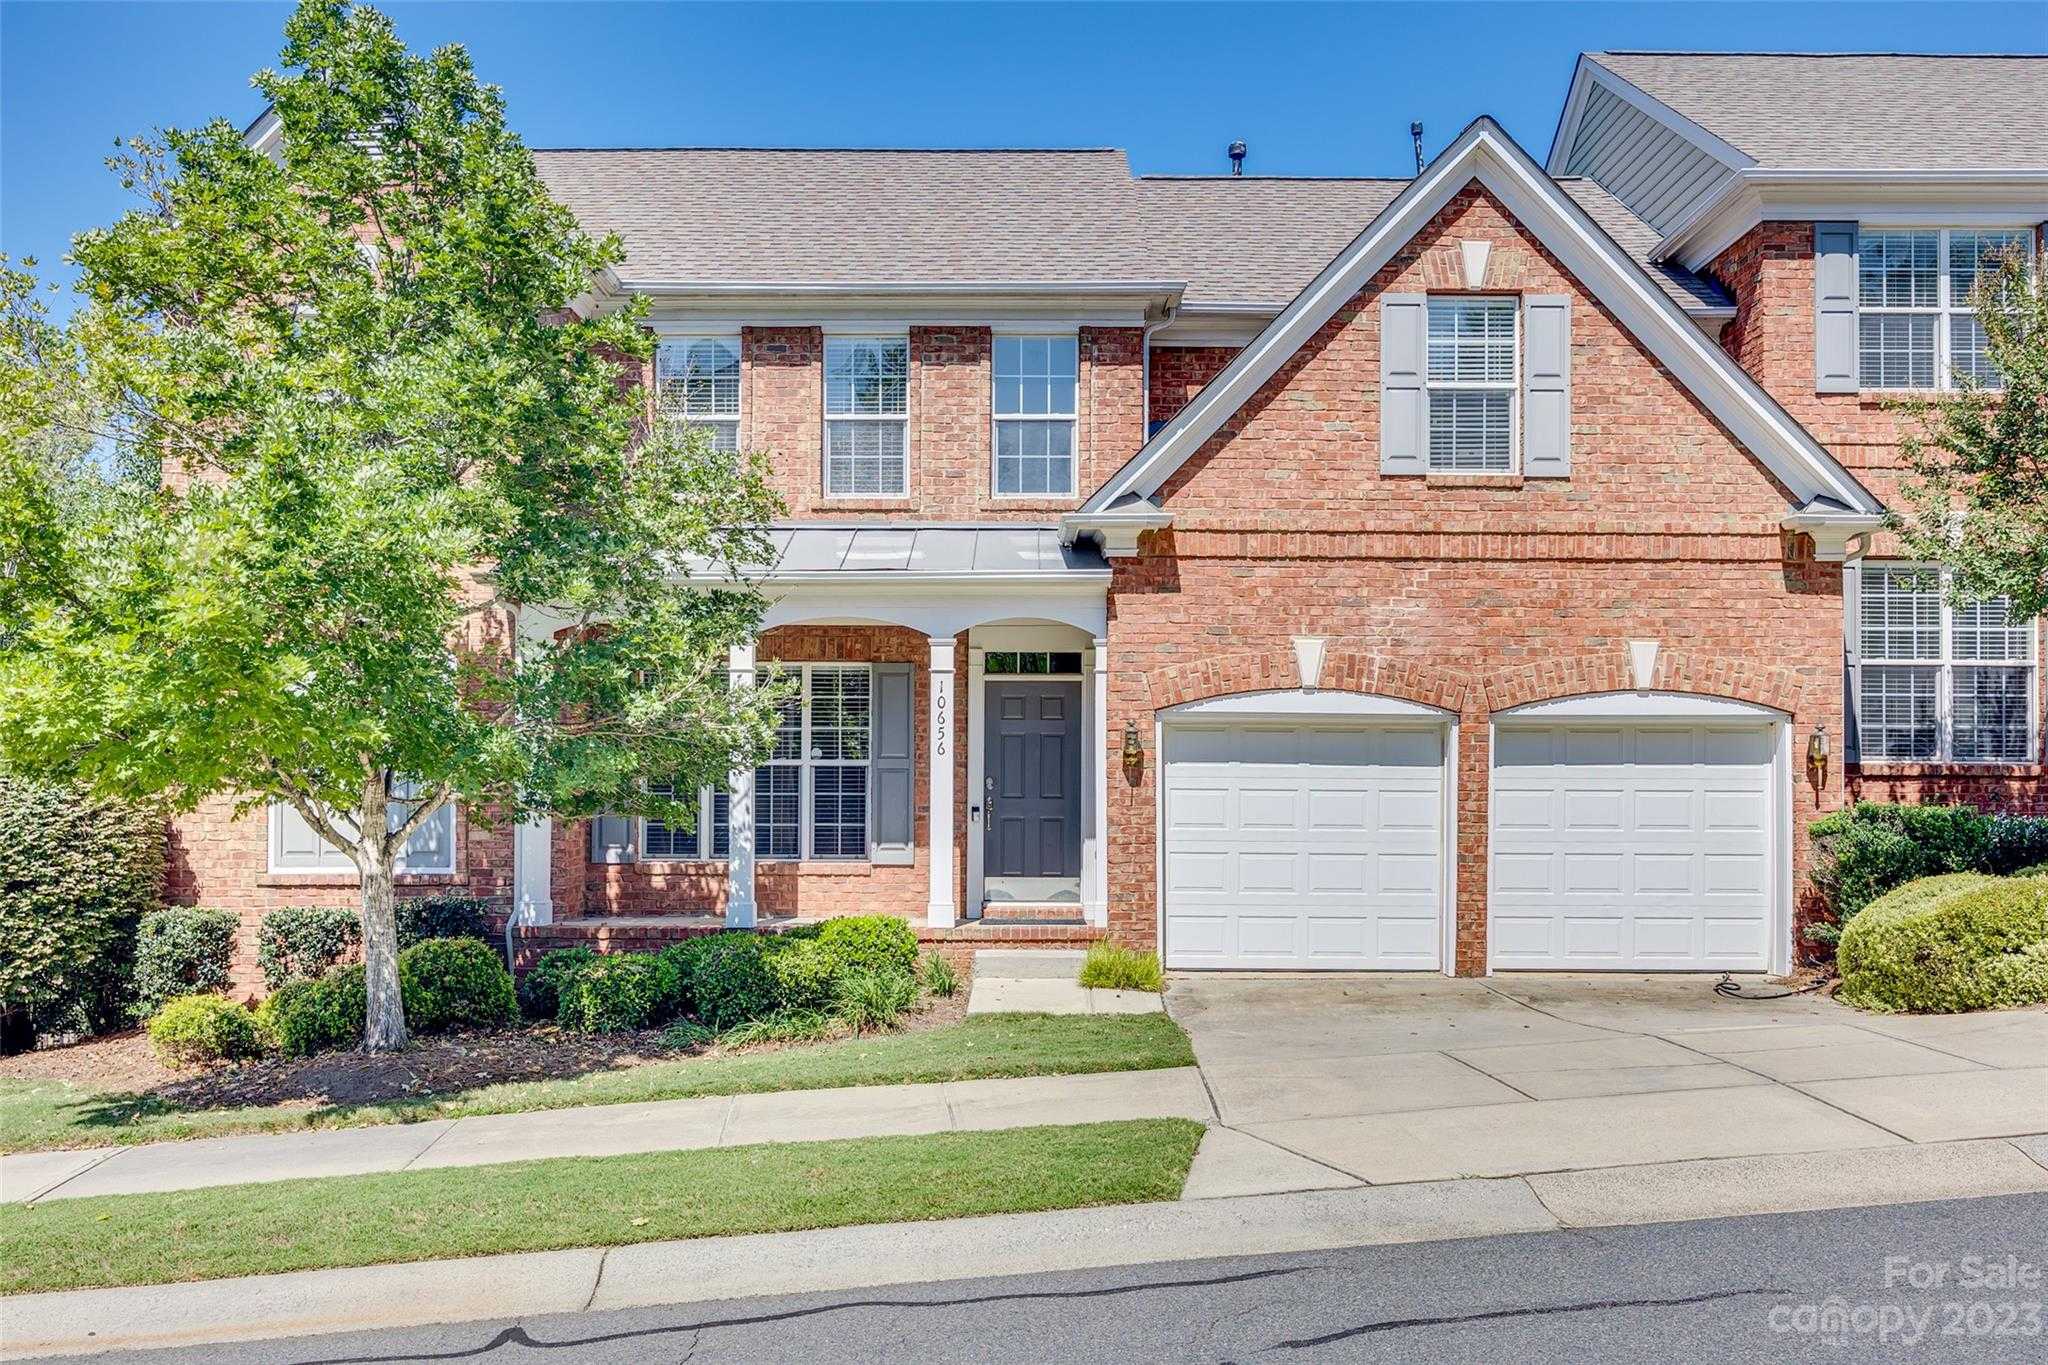 View Charlotte, NC 28277 townhome